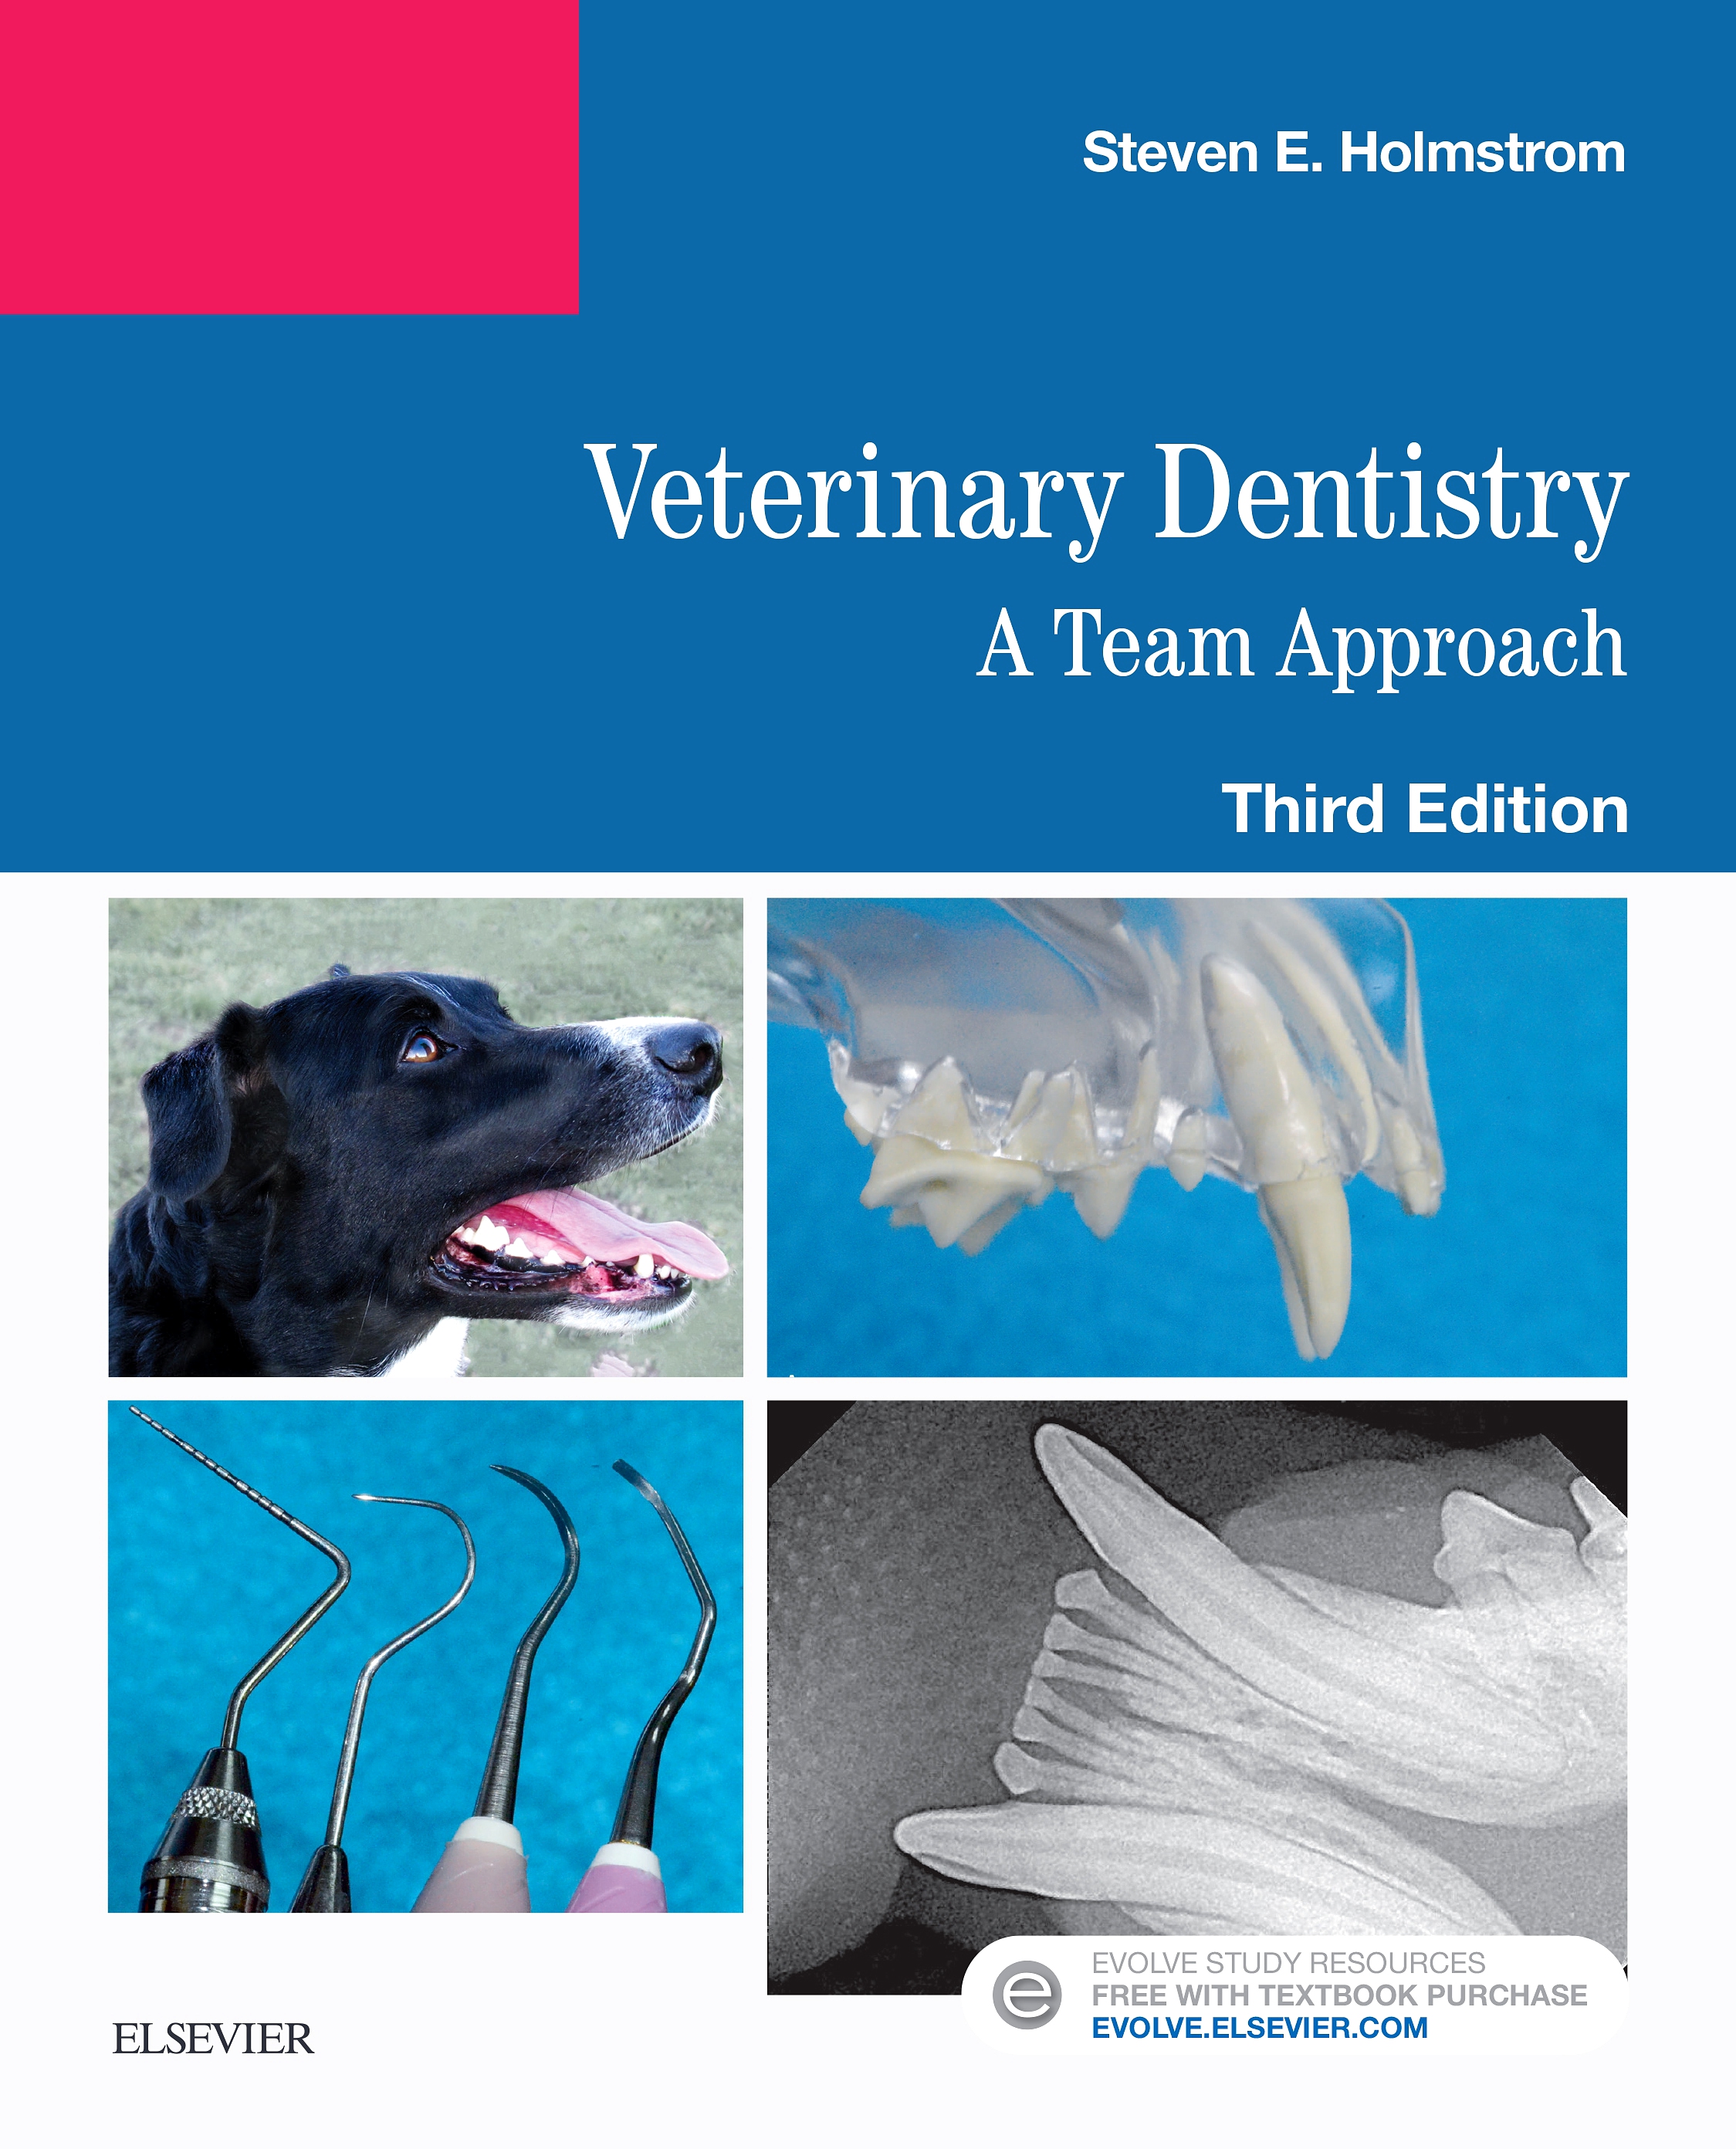 Evolve Resources for Veterinary Dentistry, 3rd Edition